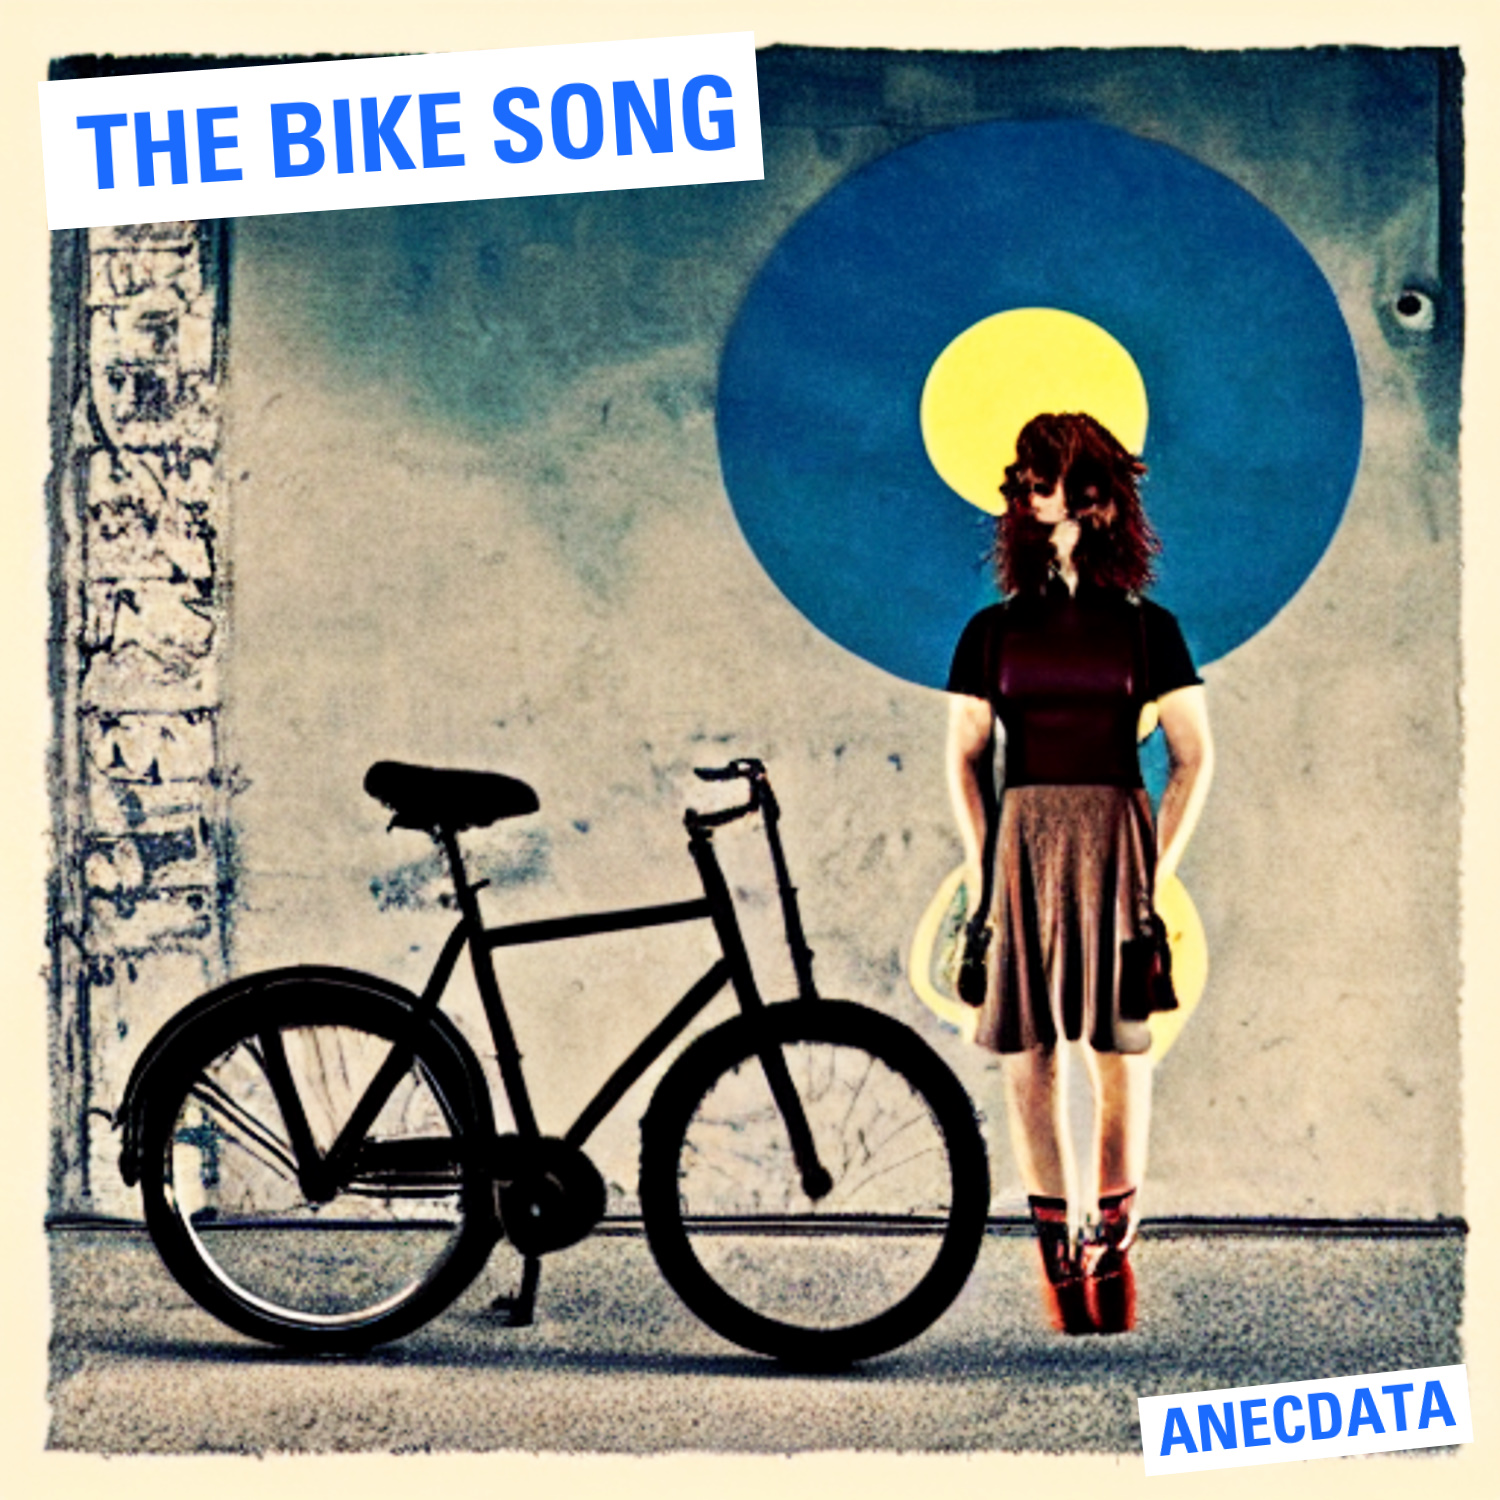 Song Bike. The mixtures - the pushbike Song. 10 Little Bicycles Song. Bike song